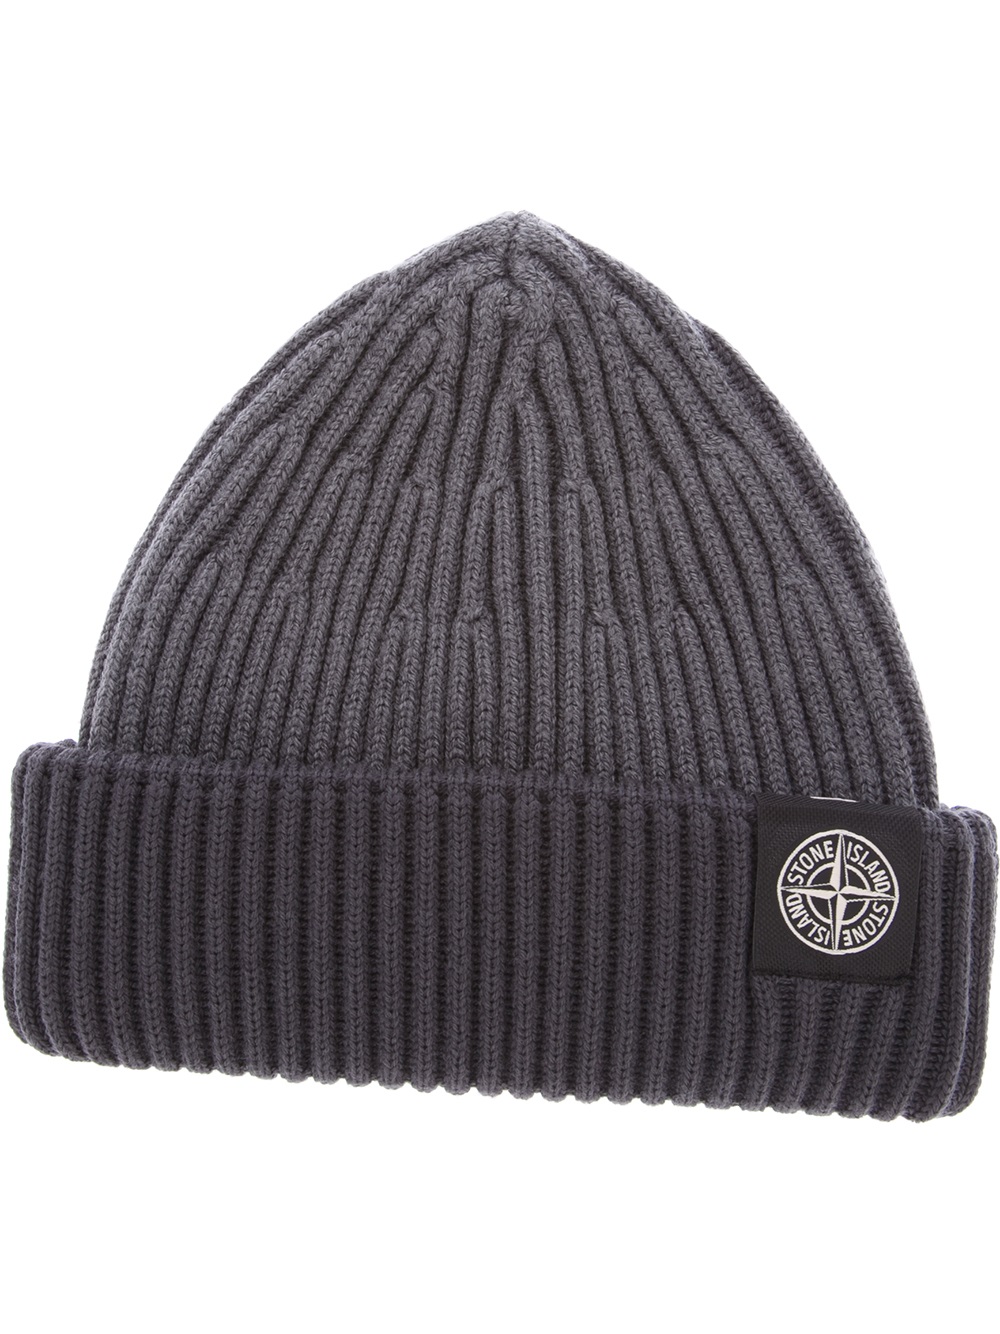 Lyst - Stone Island Ribbed Beanie in Gray for Men